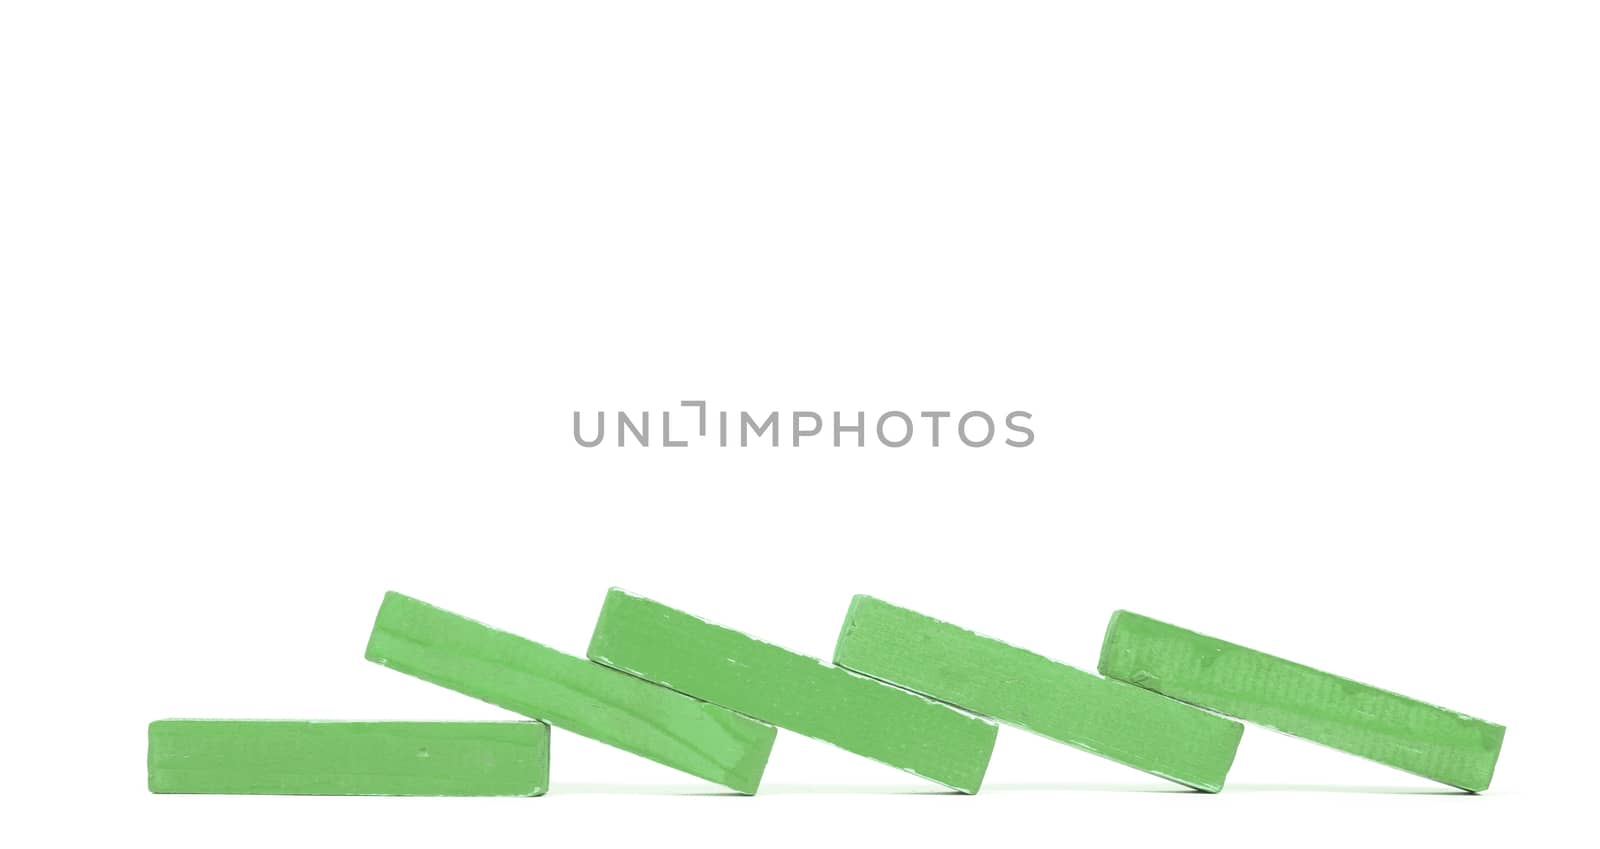 Vintage green building blocks isolated on white background